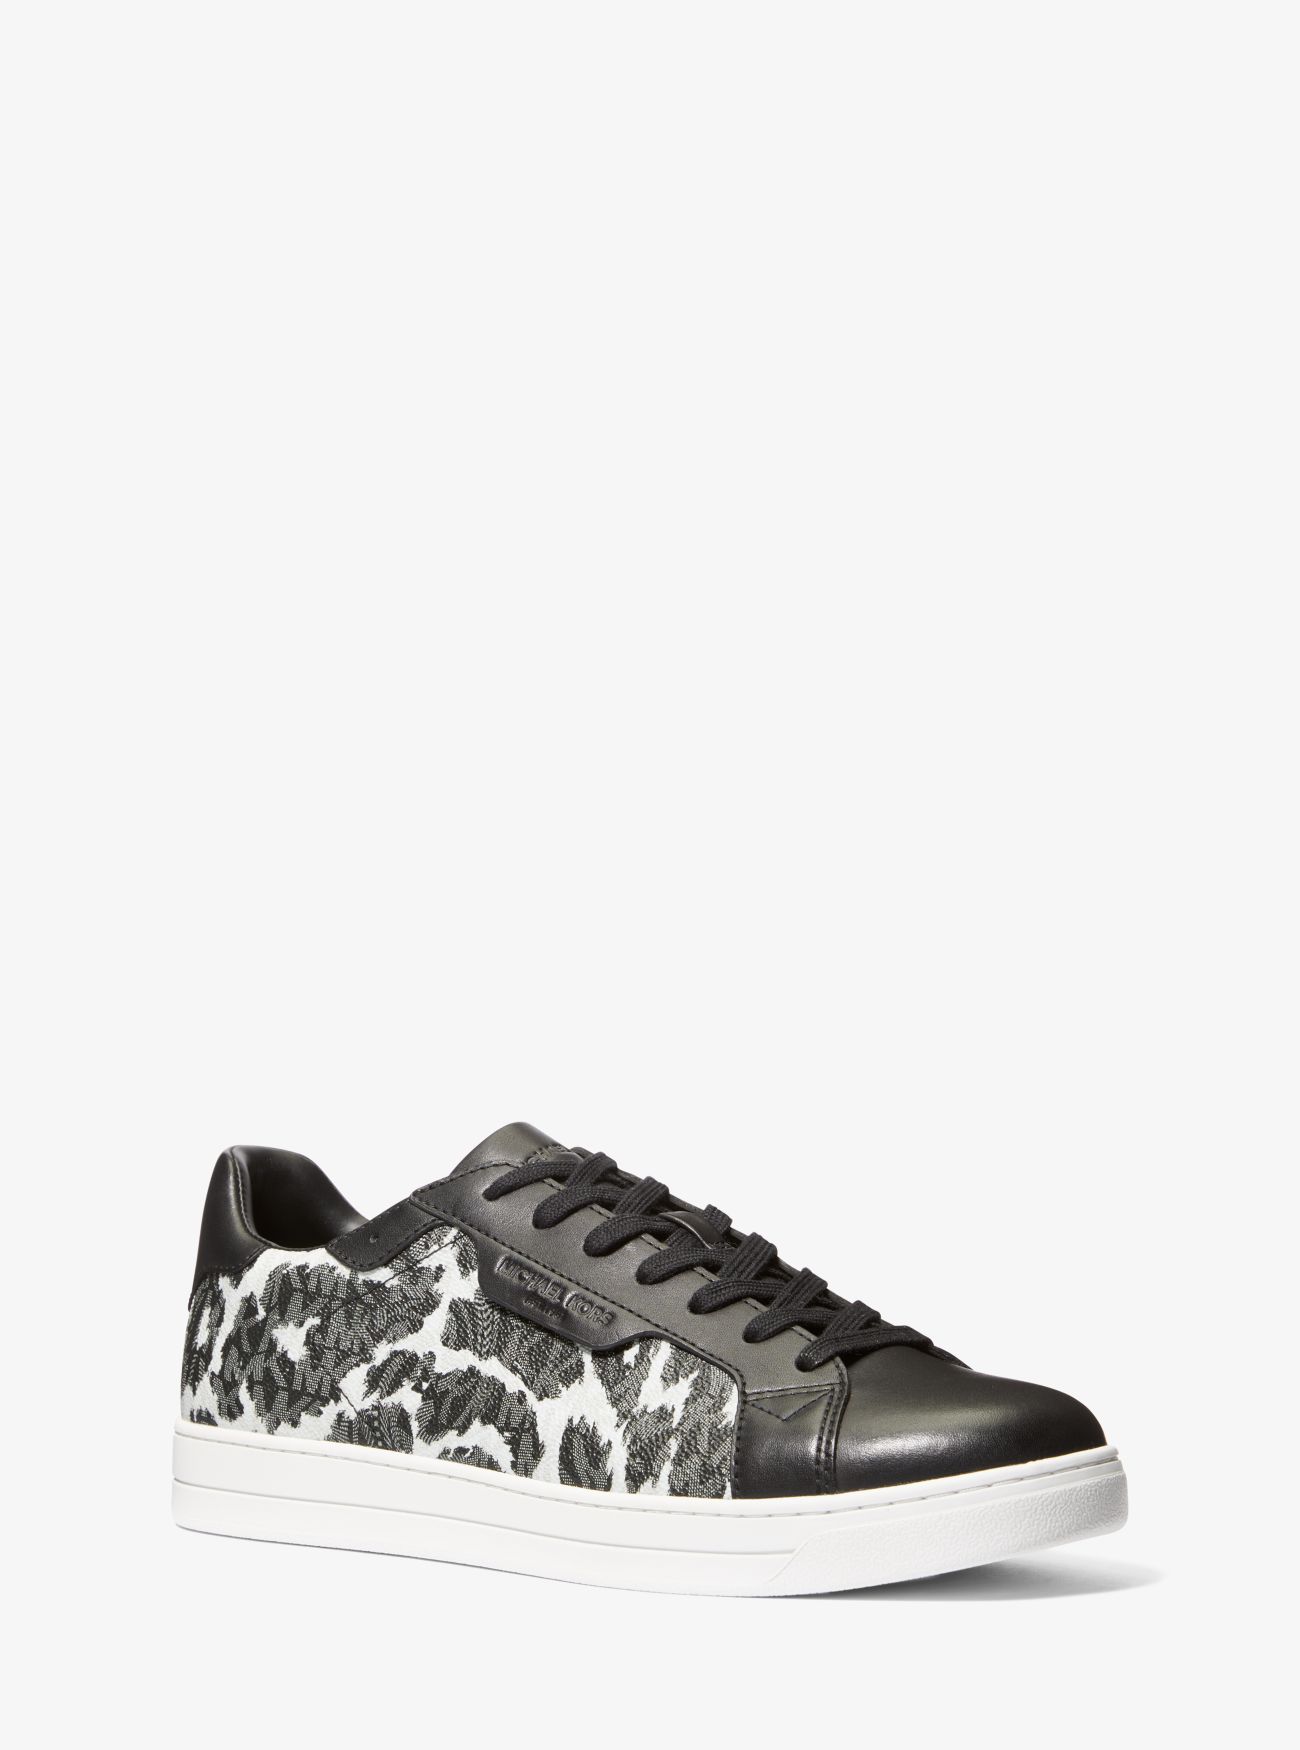 MK Keating Leopard Logo and Leather Trainers - Grey - Michael Kors